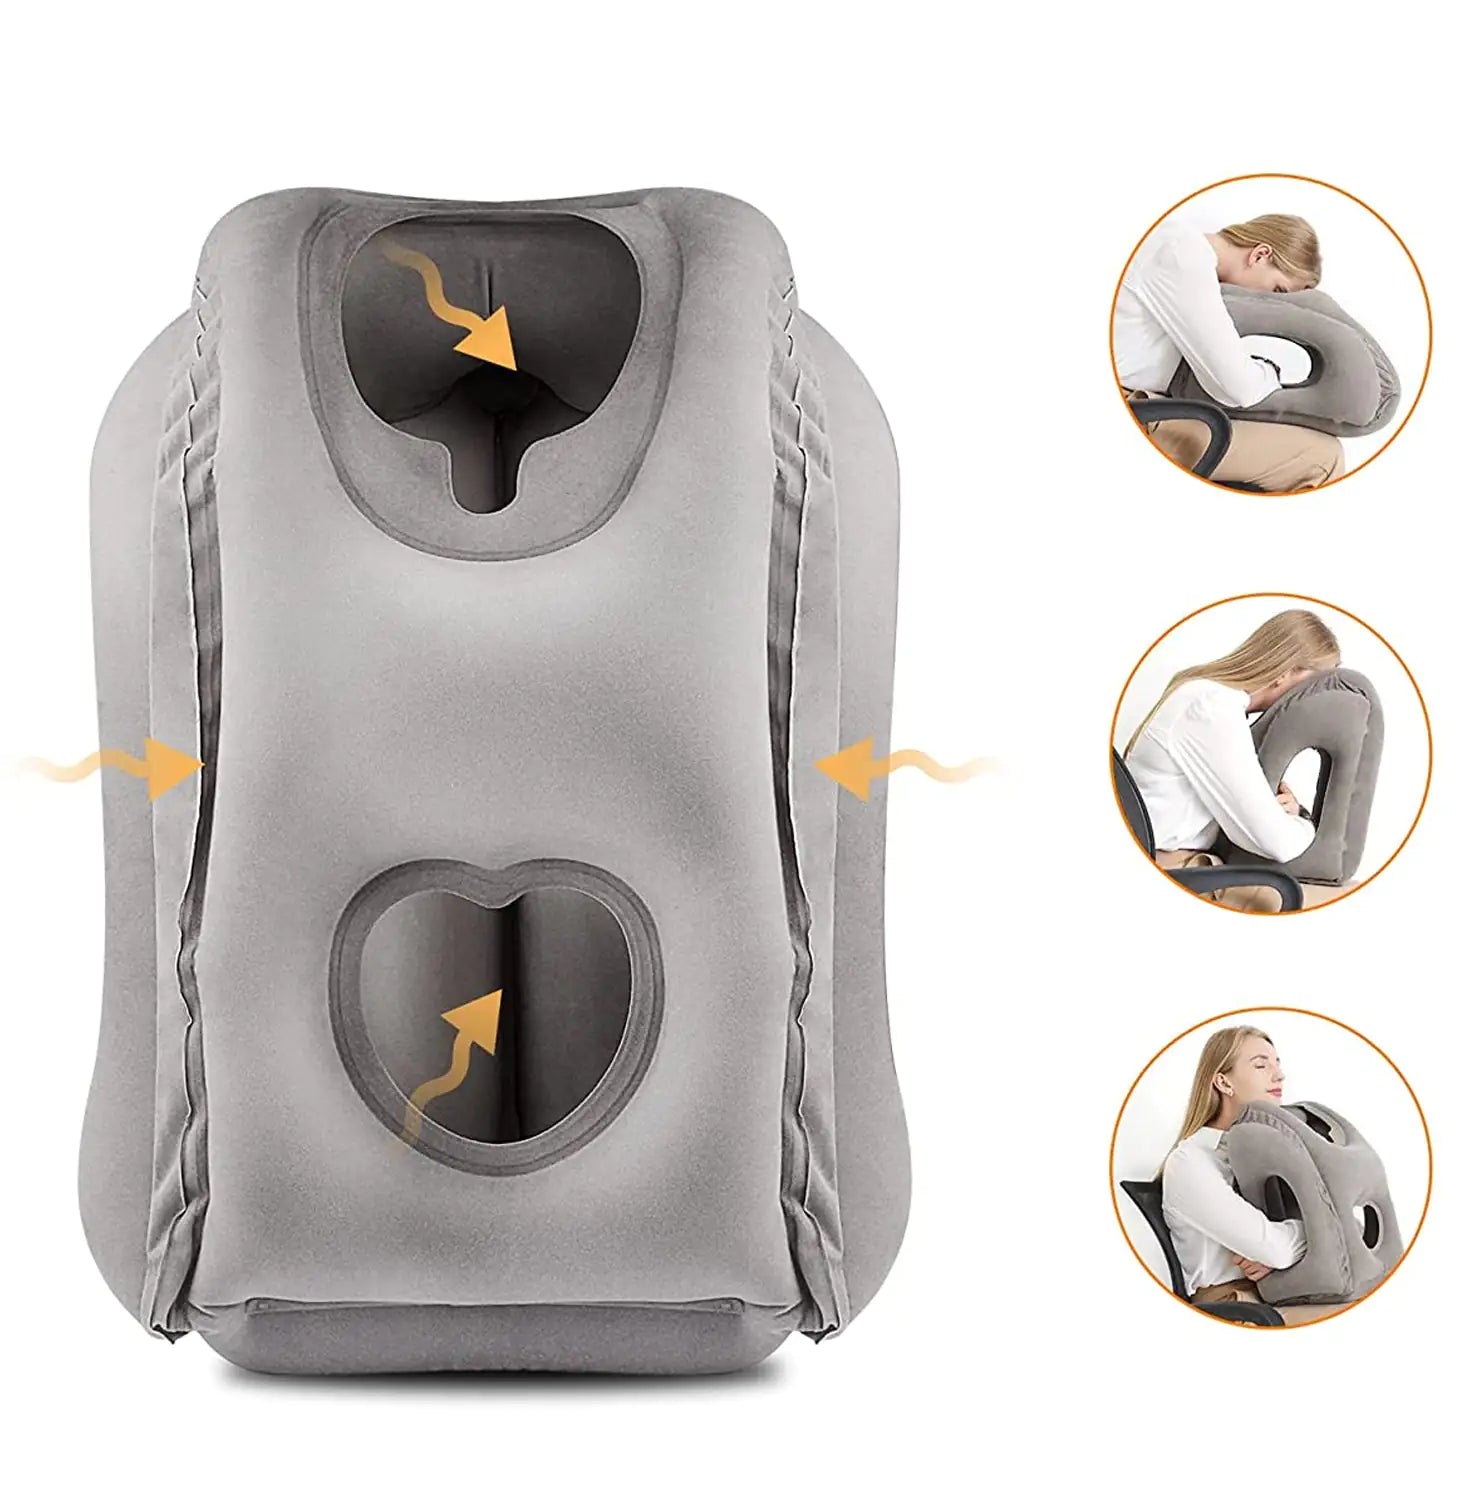 Inflatable Travel Pillow: Compact Comfort